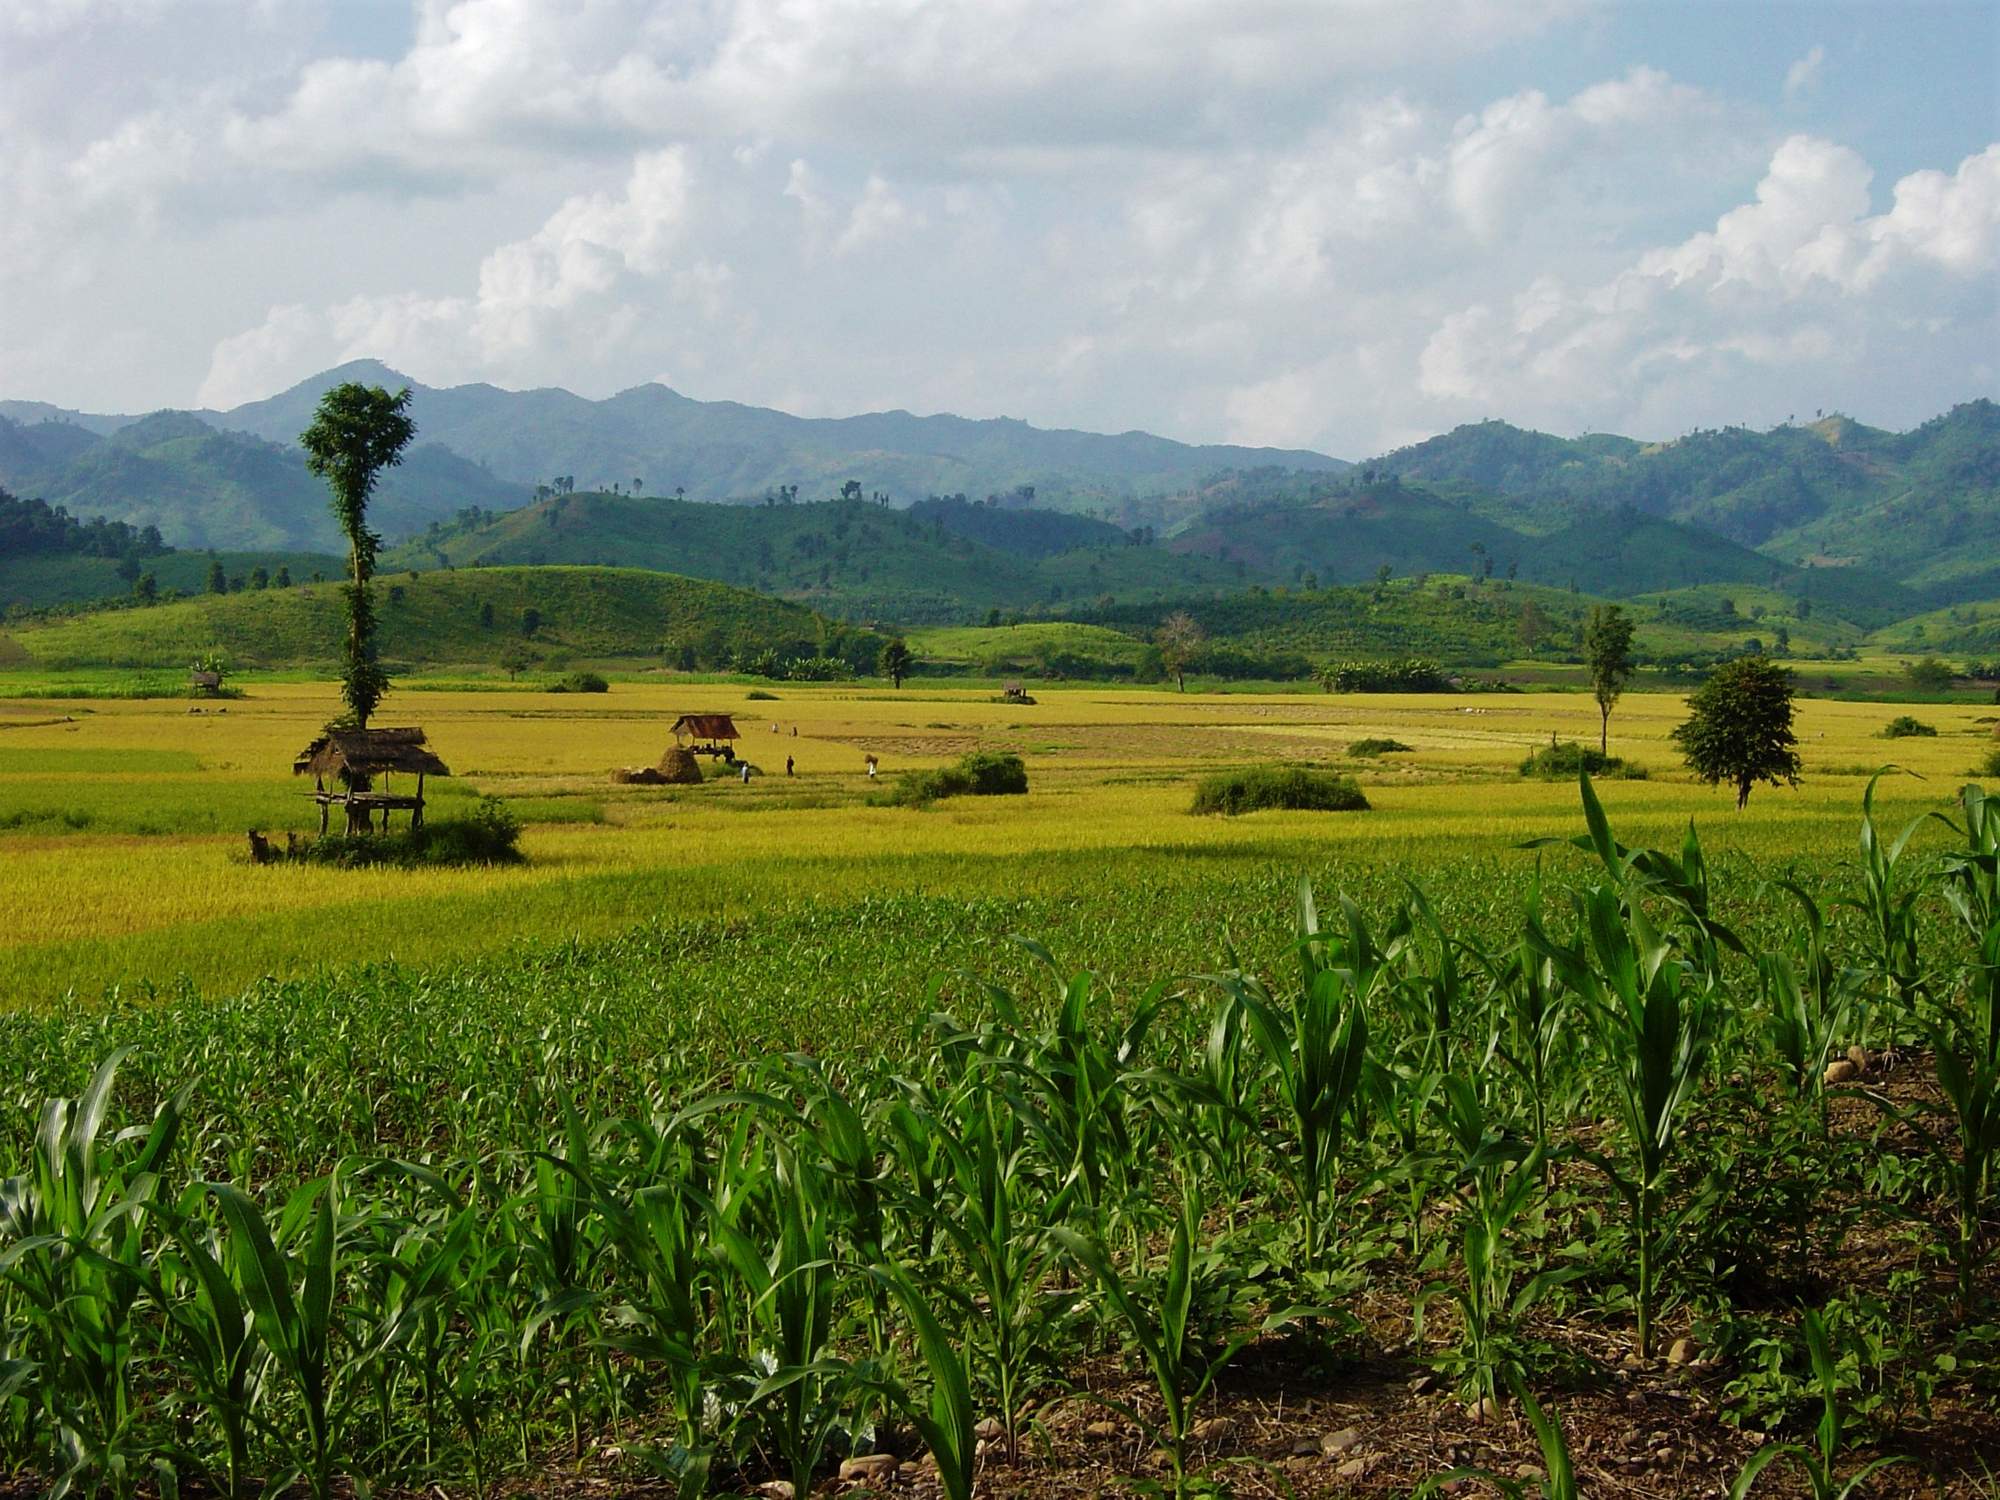 Photos from our Laos - South to North Cycling Holiday